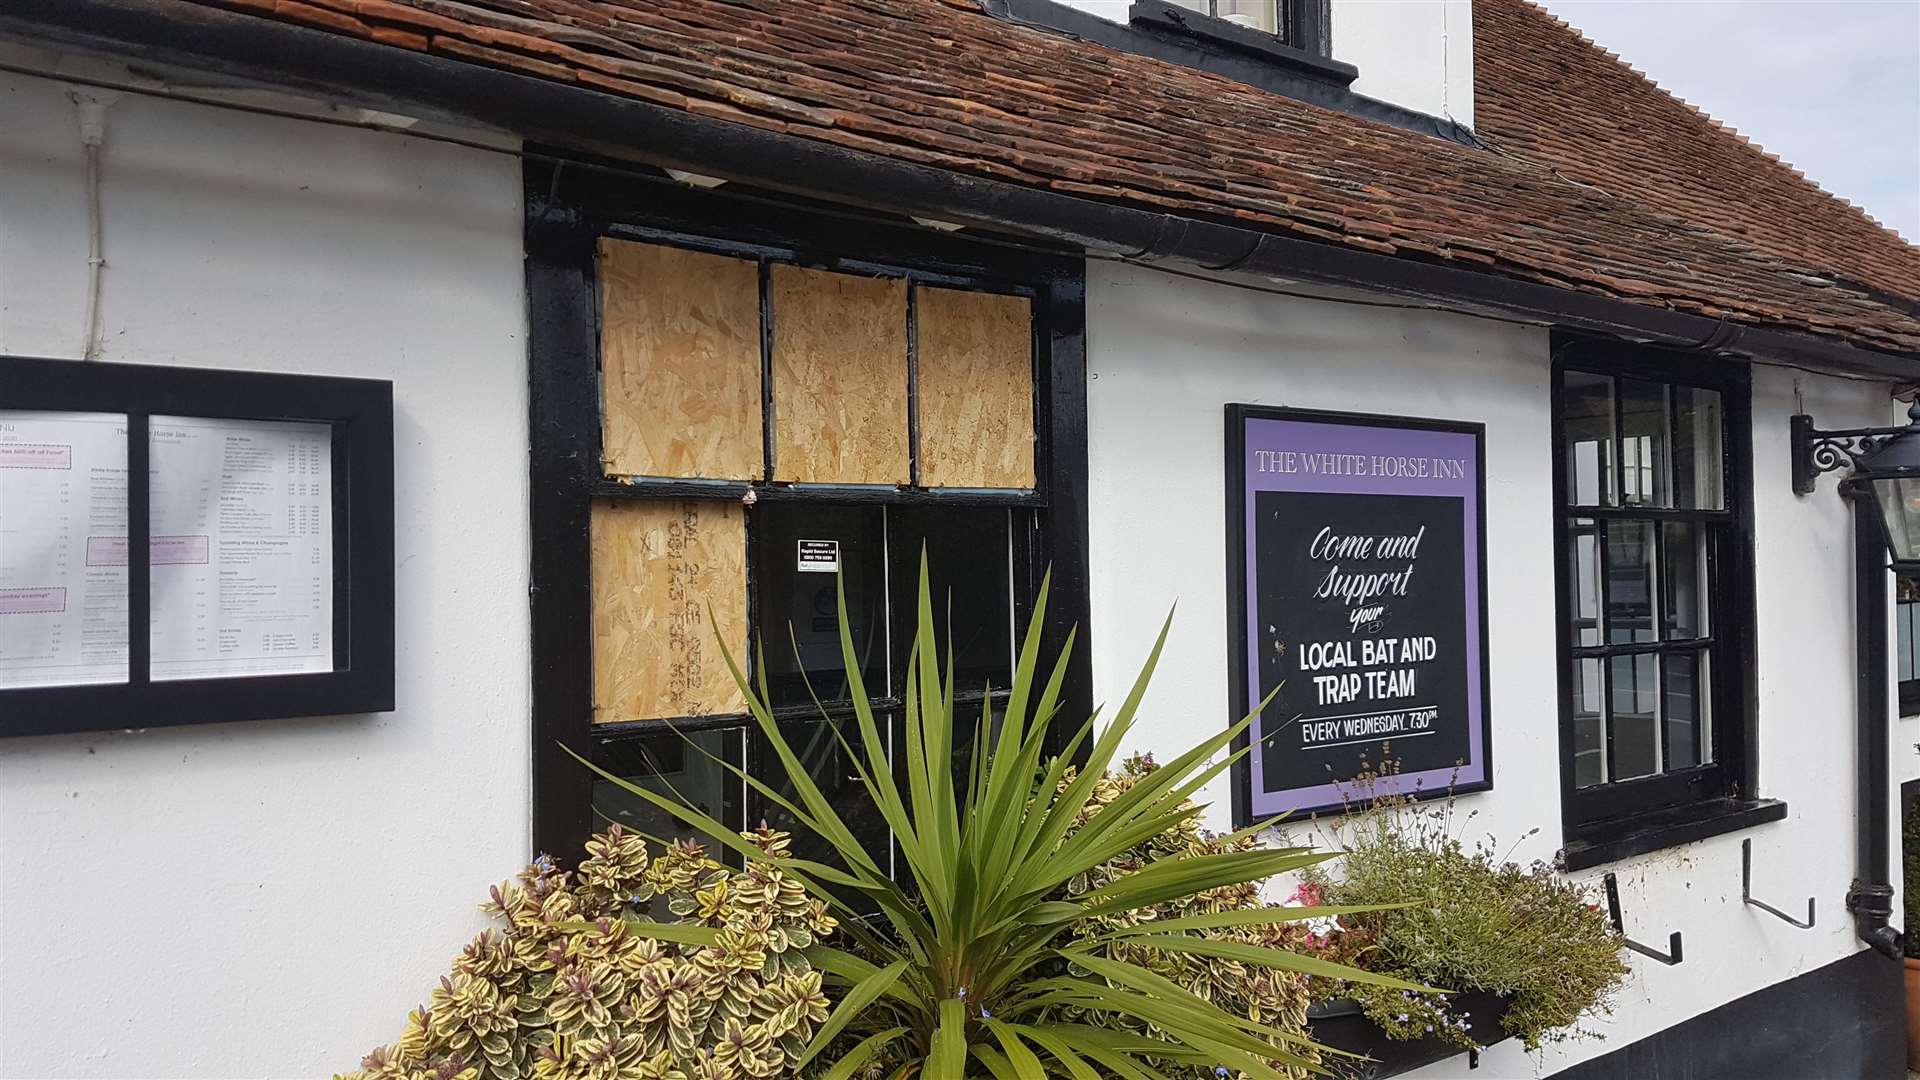 Windows have been boarded up following damage